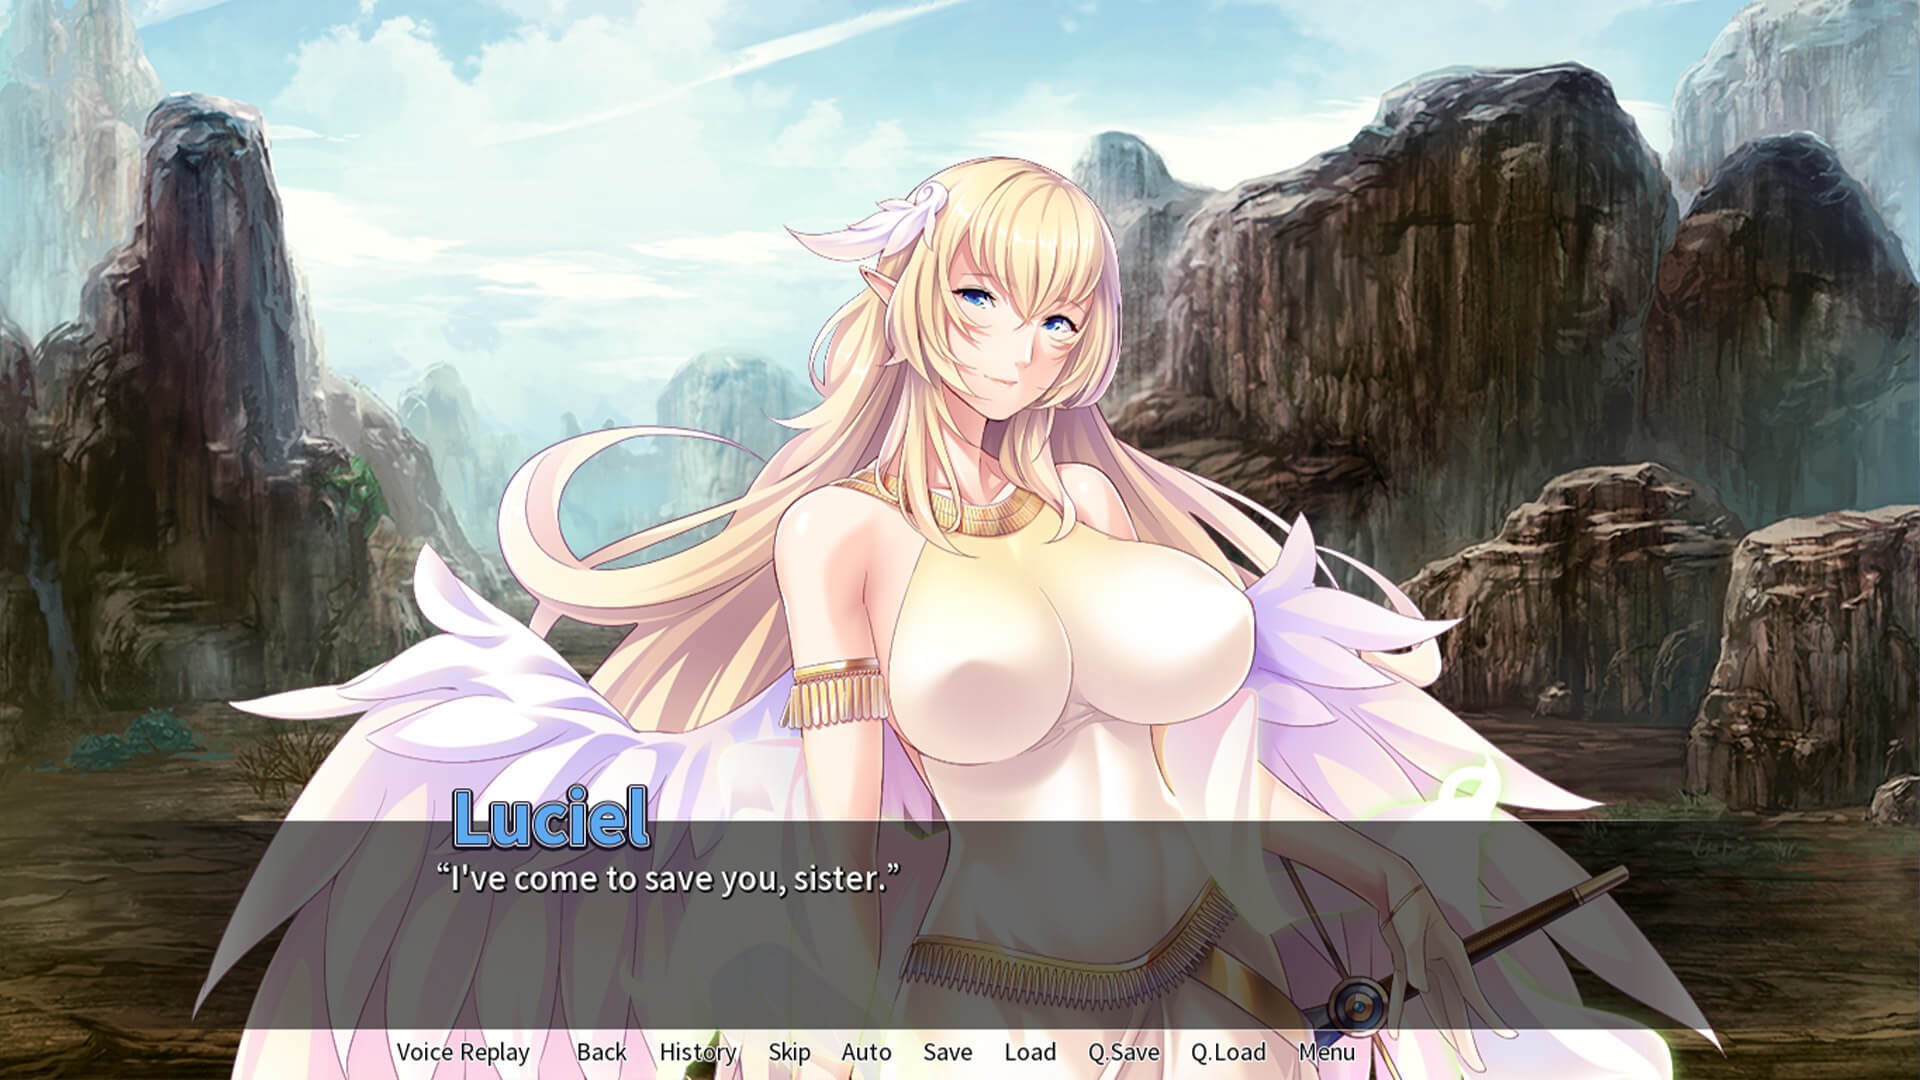 1920px x 1080px - Conquer and Breed the Demon Queen - Visual Novel Sex Game | Nutaku